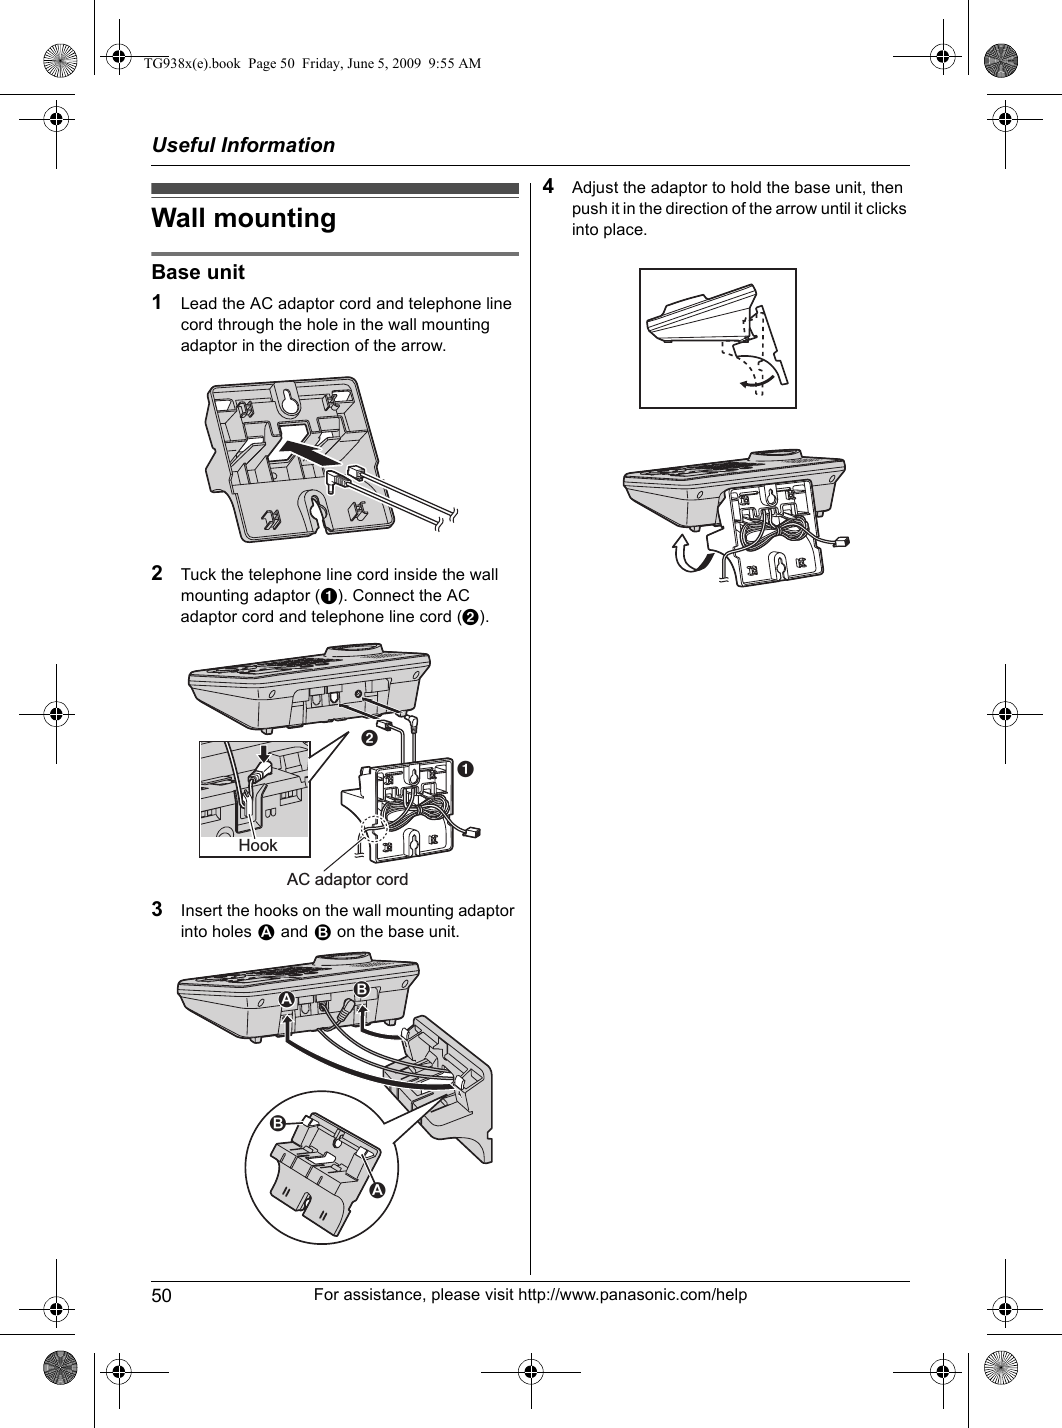 Useful Information50 For assistance, please visit http://www.panasonic.com/helpWall mountingBase unit1Lead the AC adaptor cord and telephone line cord through the hole in the wall mounting adaptor in the direction of the arrow.2Tuck the telephone line cord inside the wall mounting adaptor (A). Connect the AC adaptor cord and telephone line cord (B).3Insert the hooks on the wall mounting adaptor into holes 1 and 2 on the base unit.4Adjust the adaptor to hold the base unit, then push it in the direction of the arrow until it clicks into place.HookAC adaptor cordAB2121TG938x(e).book  Page 50  Friday, June 5, 2009  9:55 AM